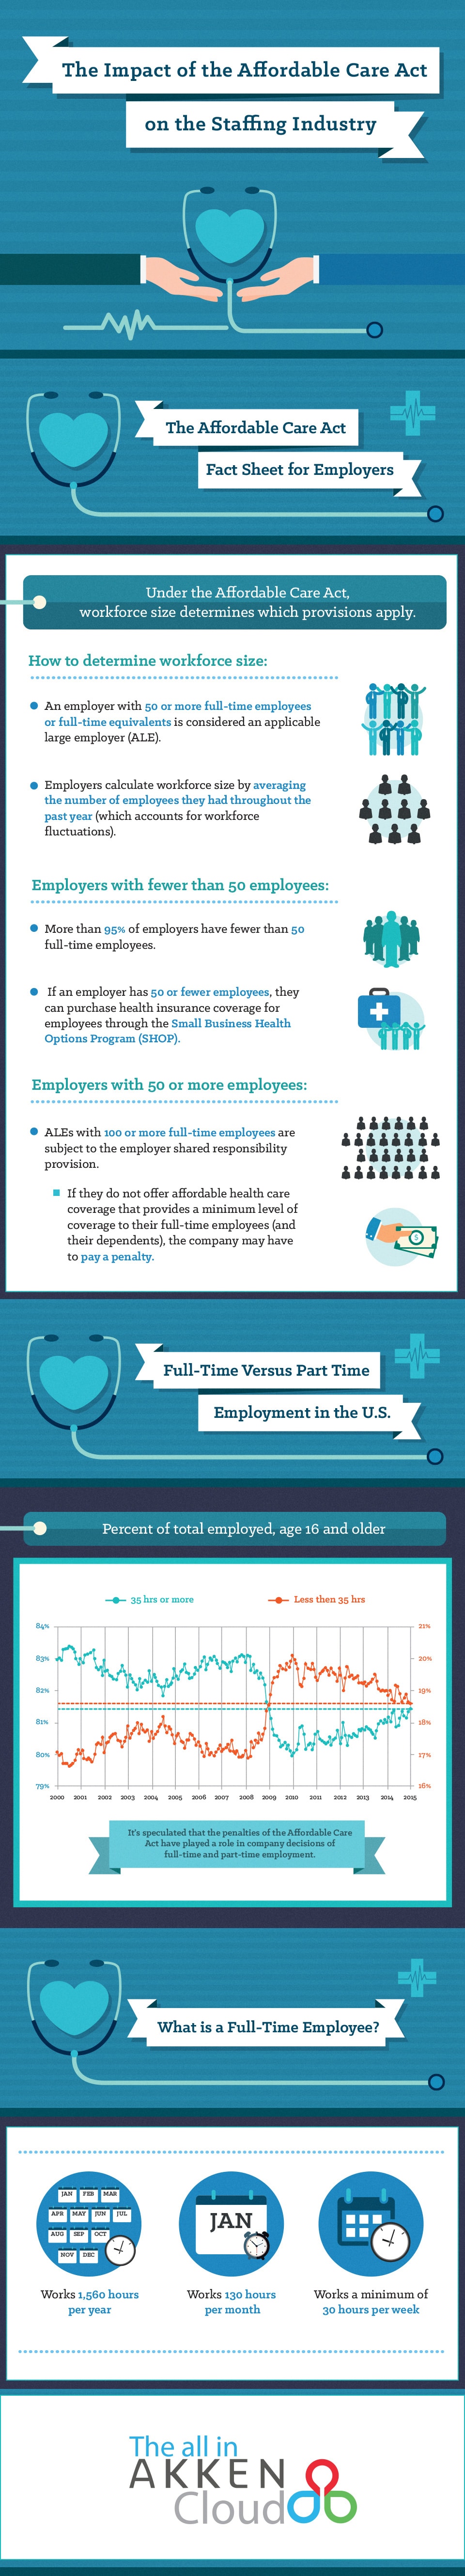 Infographic: The Impact of the Affordable Care Act on the Staffing Industry